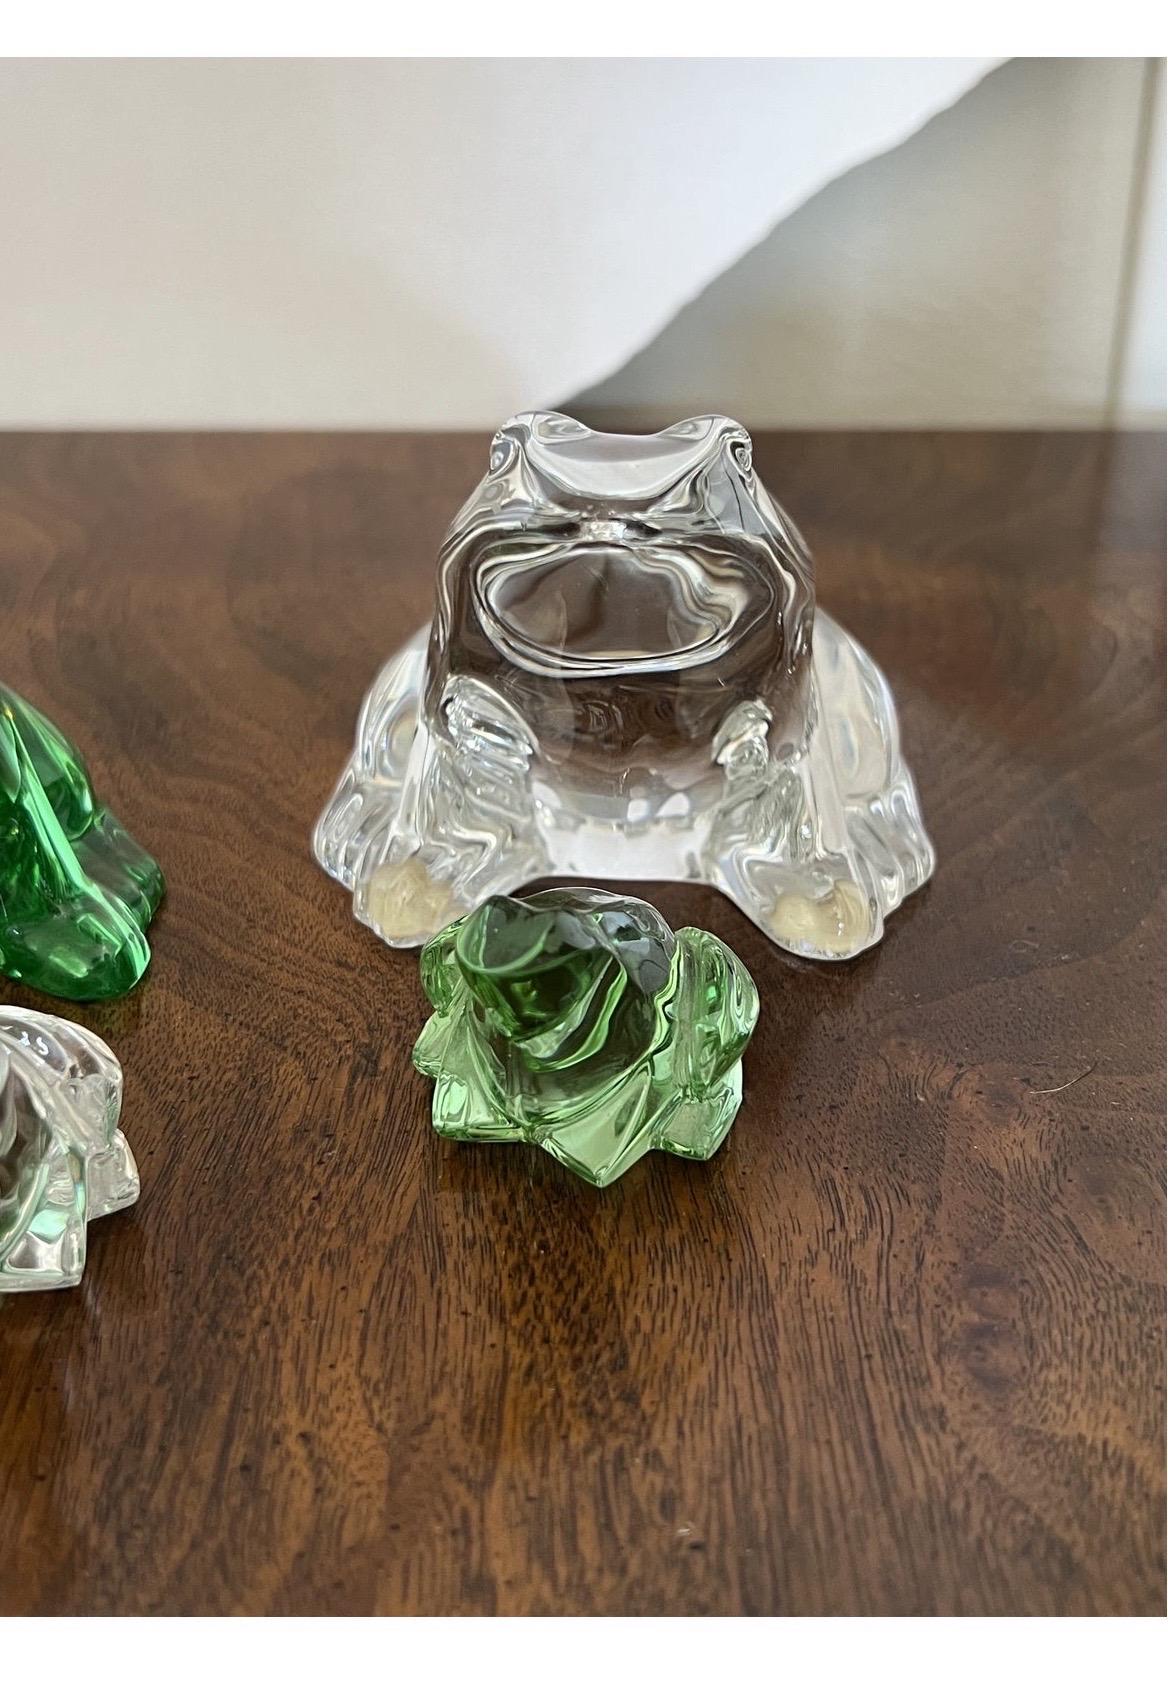 4 Pc Baccarat France Crystal Frog Family Green & Clear!.


No chips or cracks


Lg 2.625” h x 3.25” w

Sm 1.25” h x 1.5” w